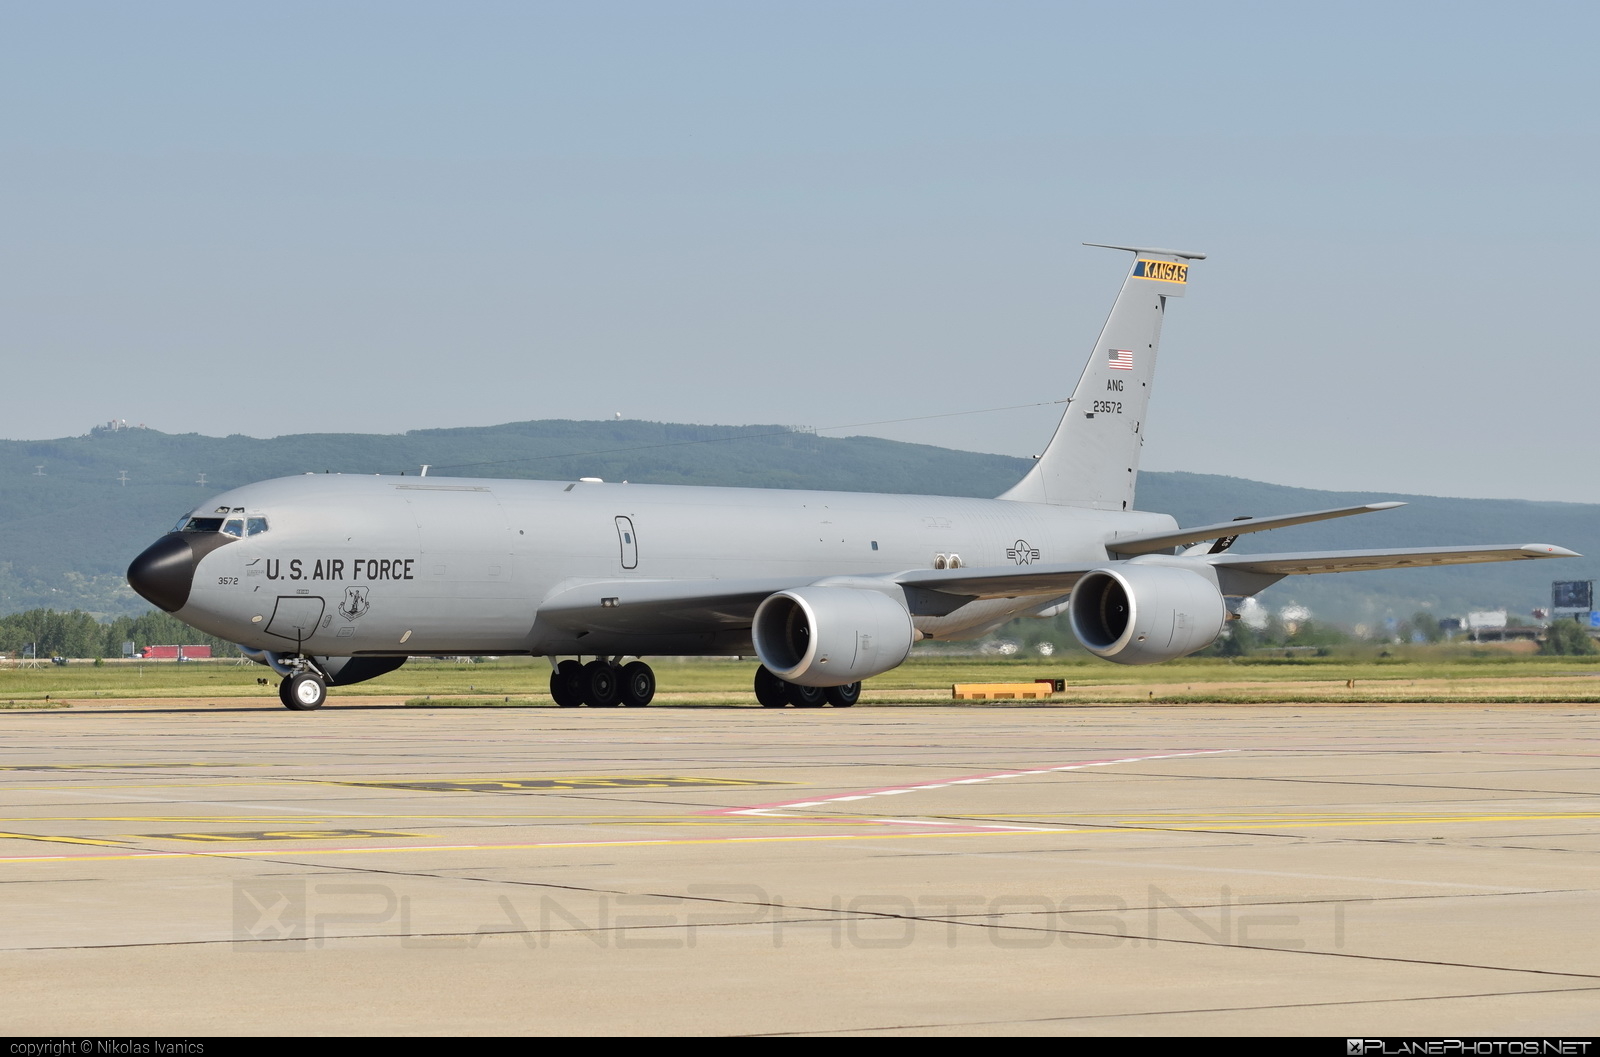 Boeing KC-135R Stratotanker - 62-3572 operated by US Air Force (USAF) #boeing #kc135 #kc135r #kc135stratotanker #stratotanker #usaf #usairforce